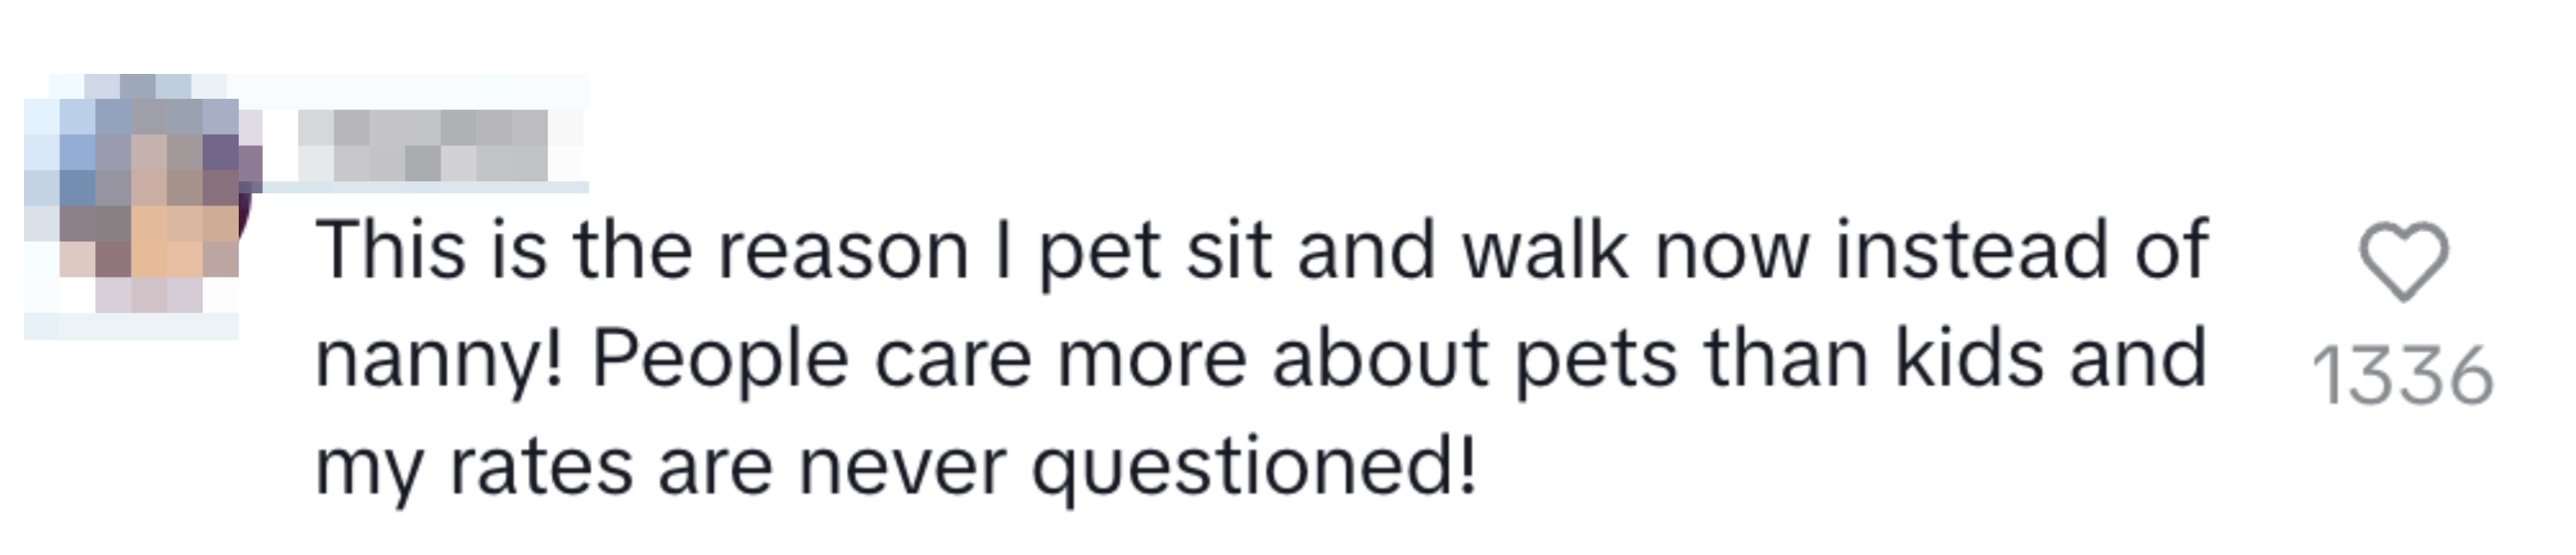 Sophie&#x27;s social media post about preferring pet sitting over nannying due to better appreciation and rates, with likes